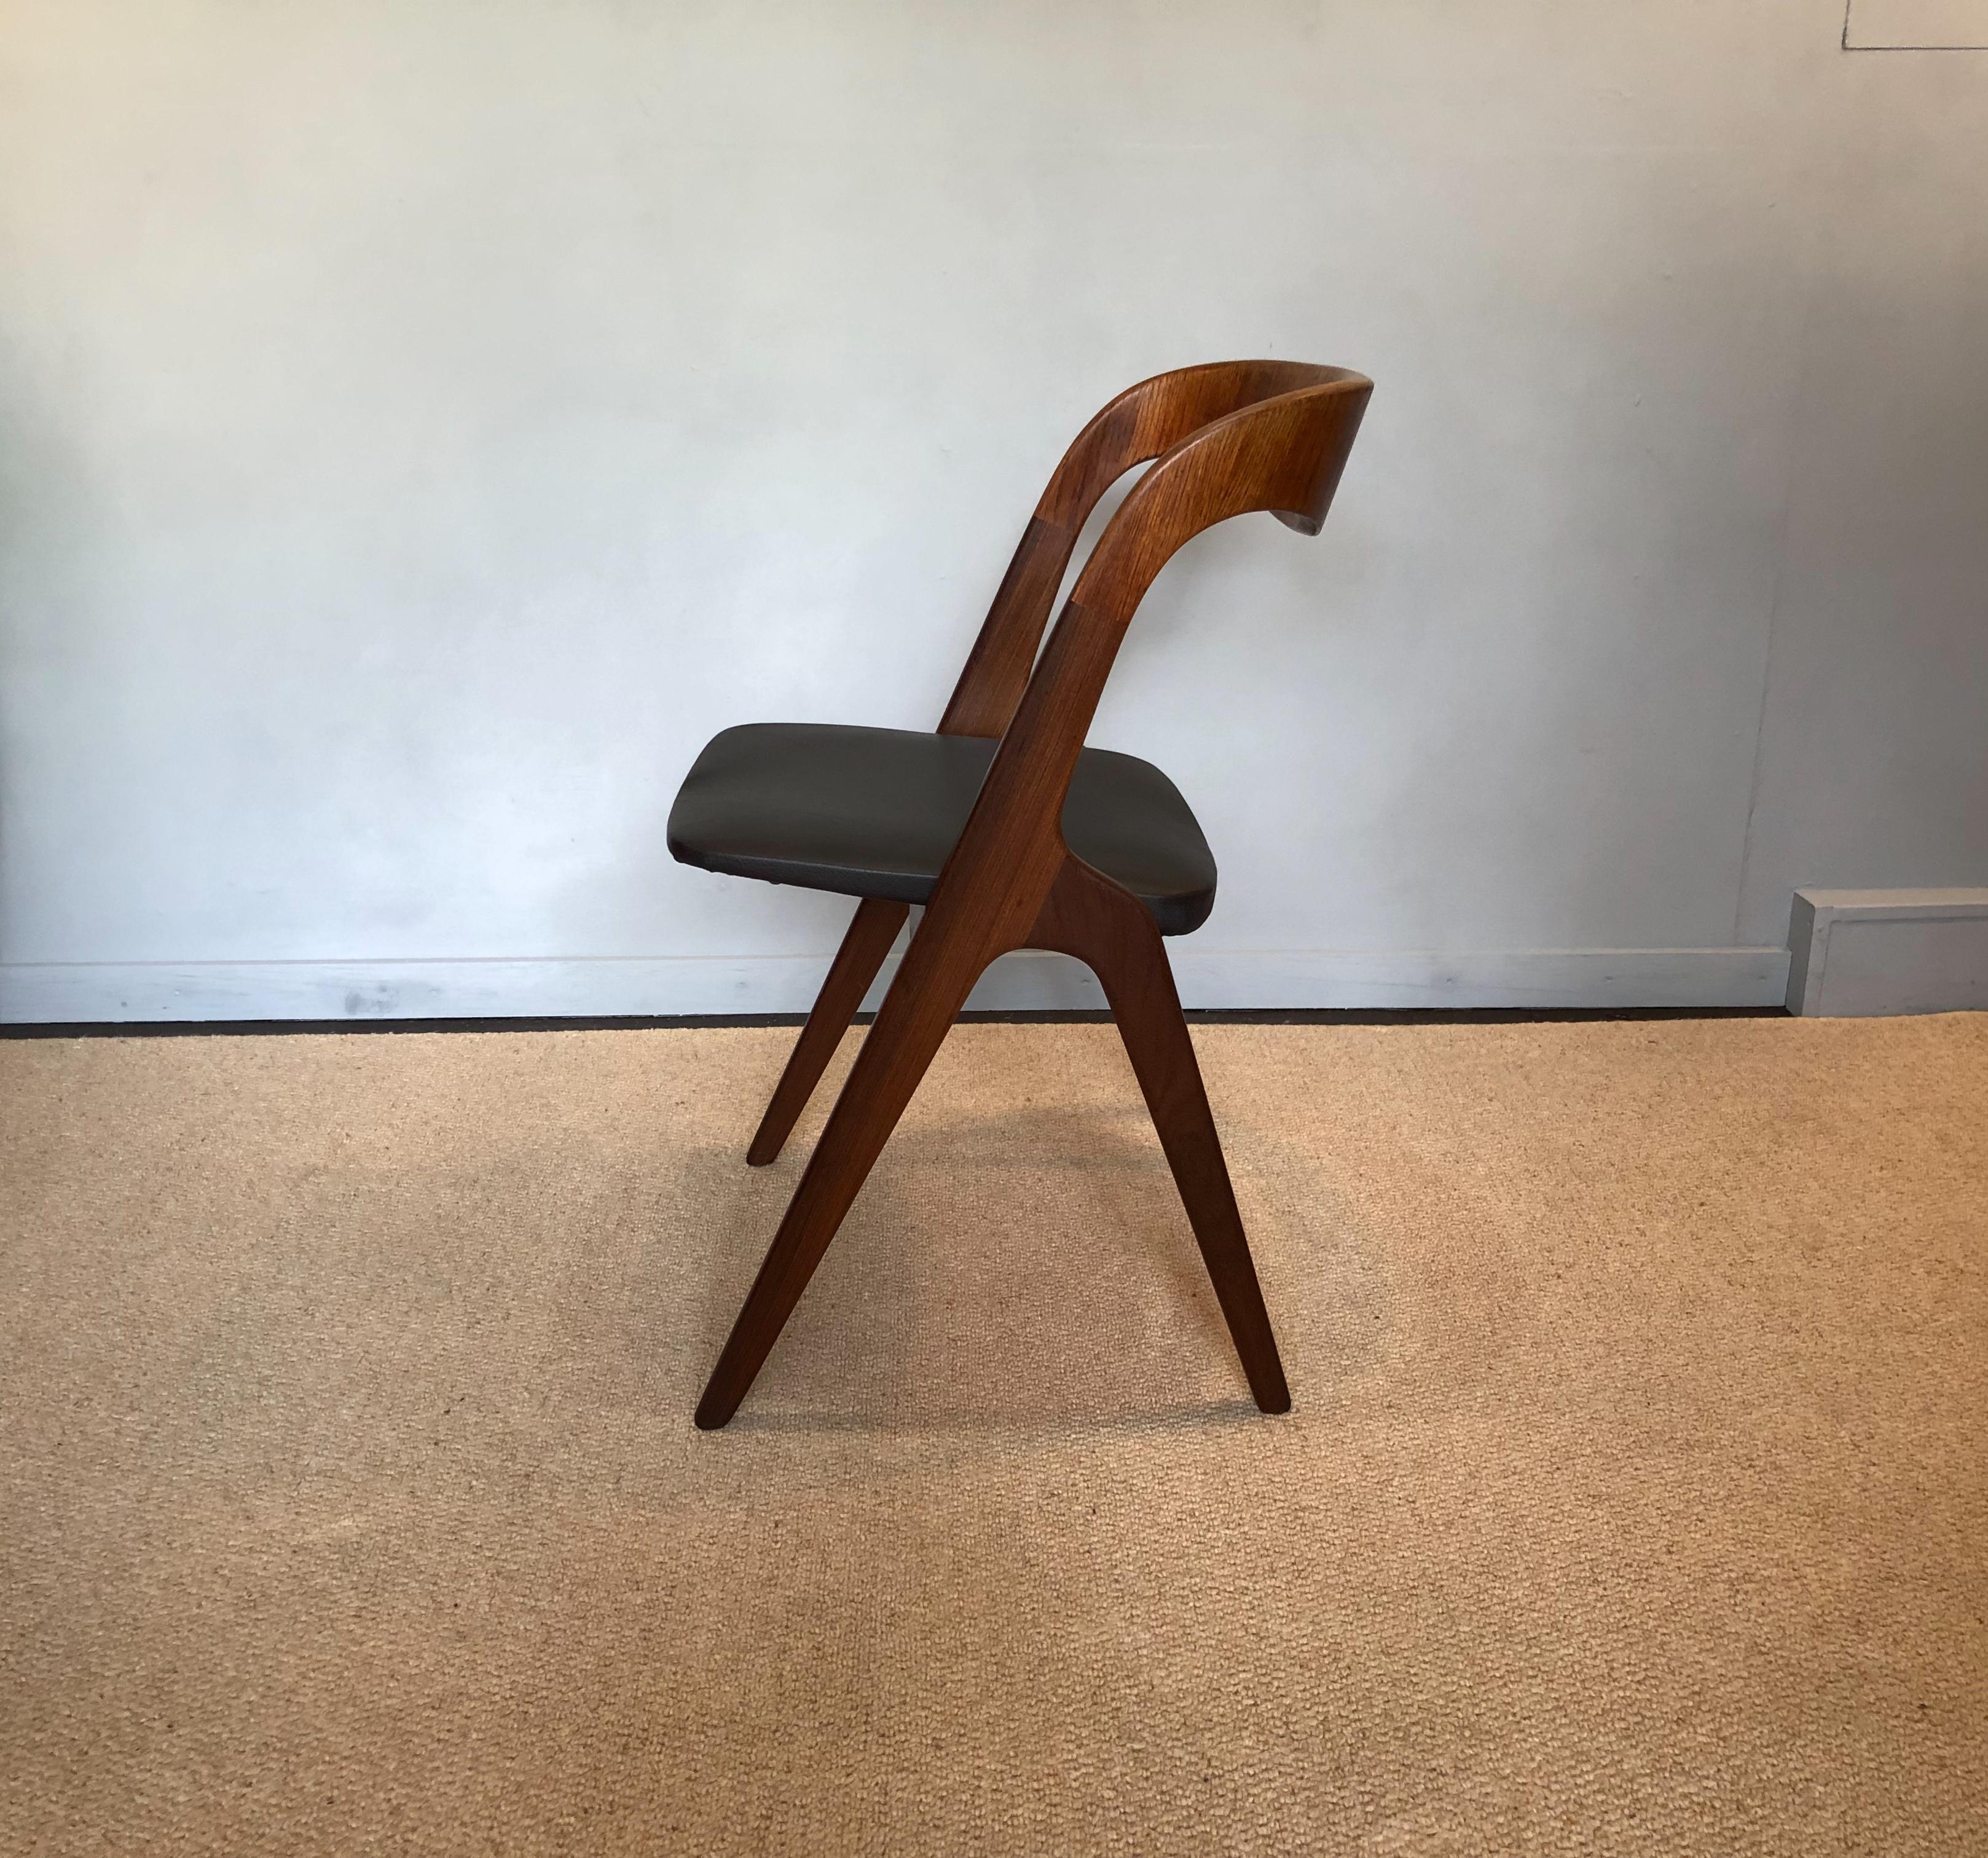 A set of 4 teak dining chairs designed by Johannes Andersen for Vamo Sonderborg. Model ‘Sonja’ circa 1960. Re-oiled frames with professionally reupholstered seats of leather or fabric of your choice. Amazing design profile. Superb condition